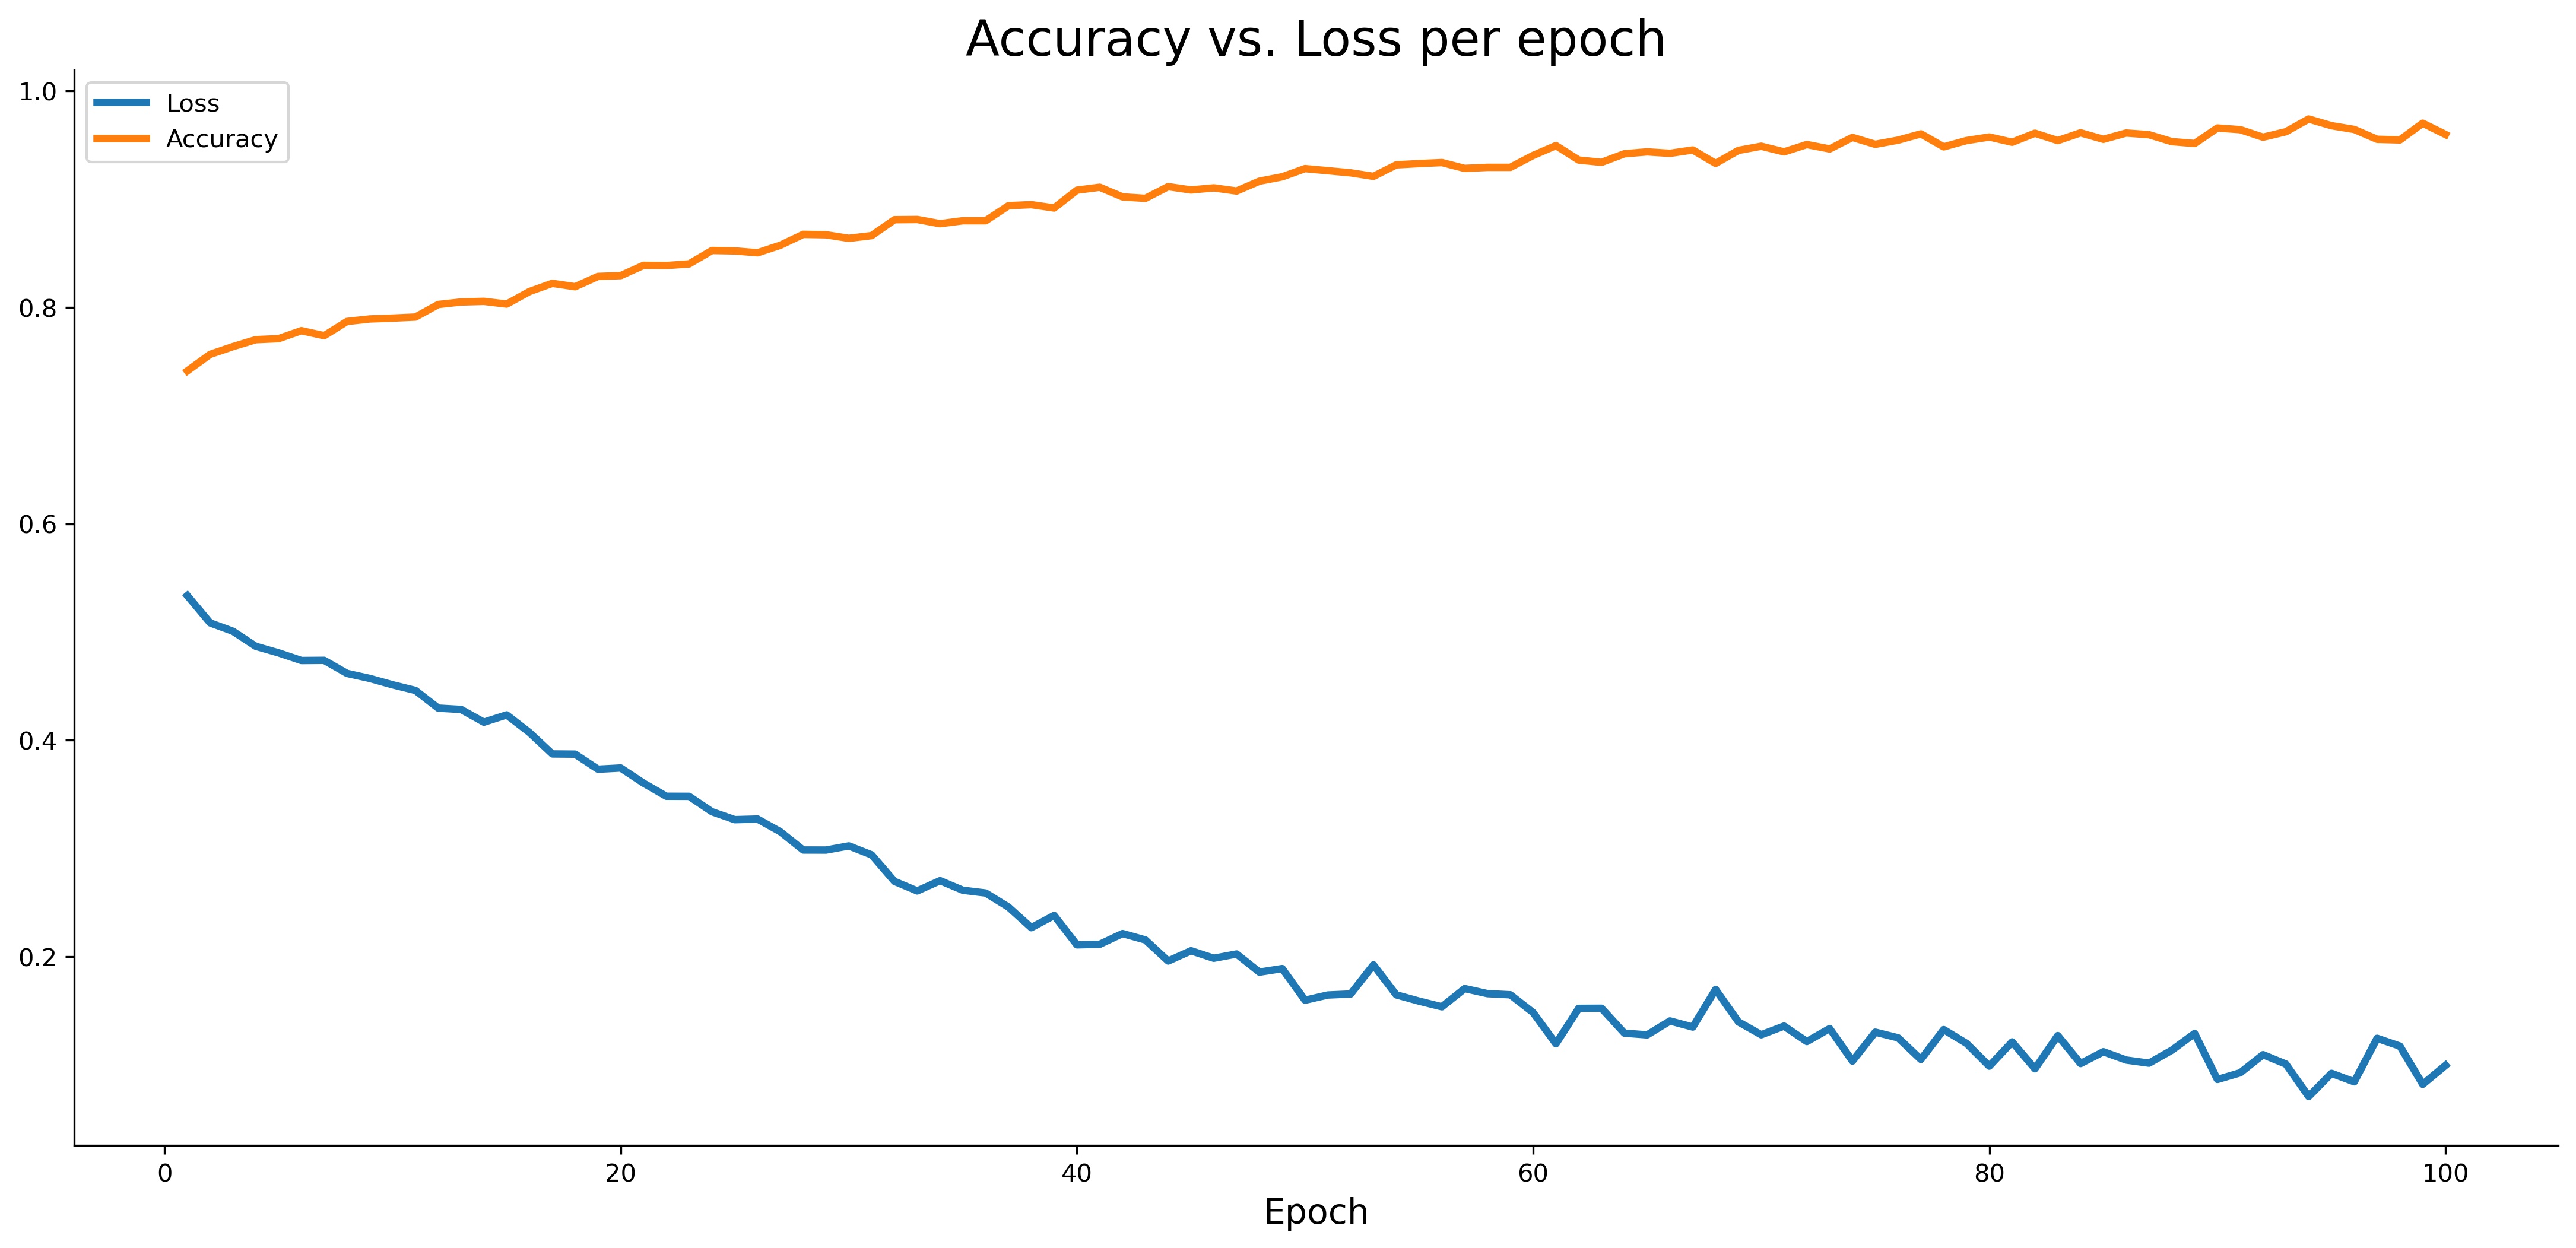 Image 10 — Accuracy vs loss on the training set (image by author)